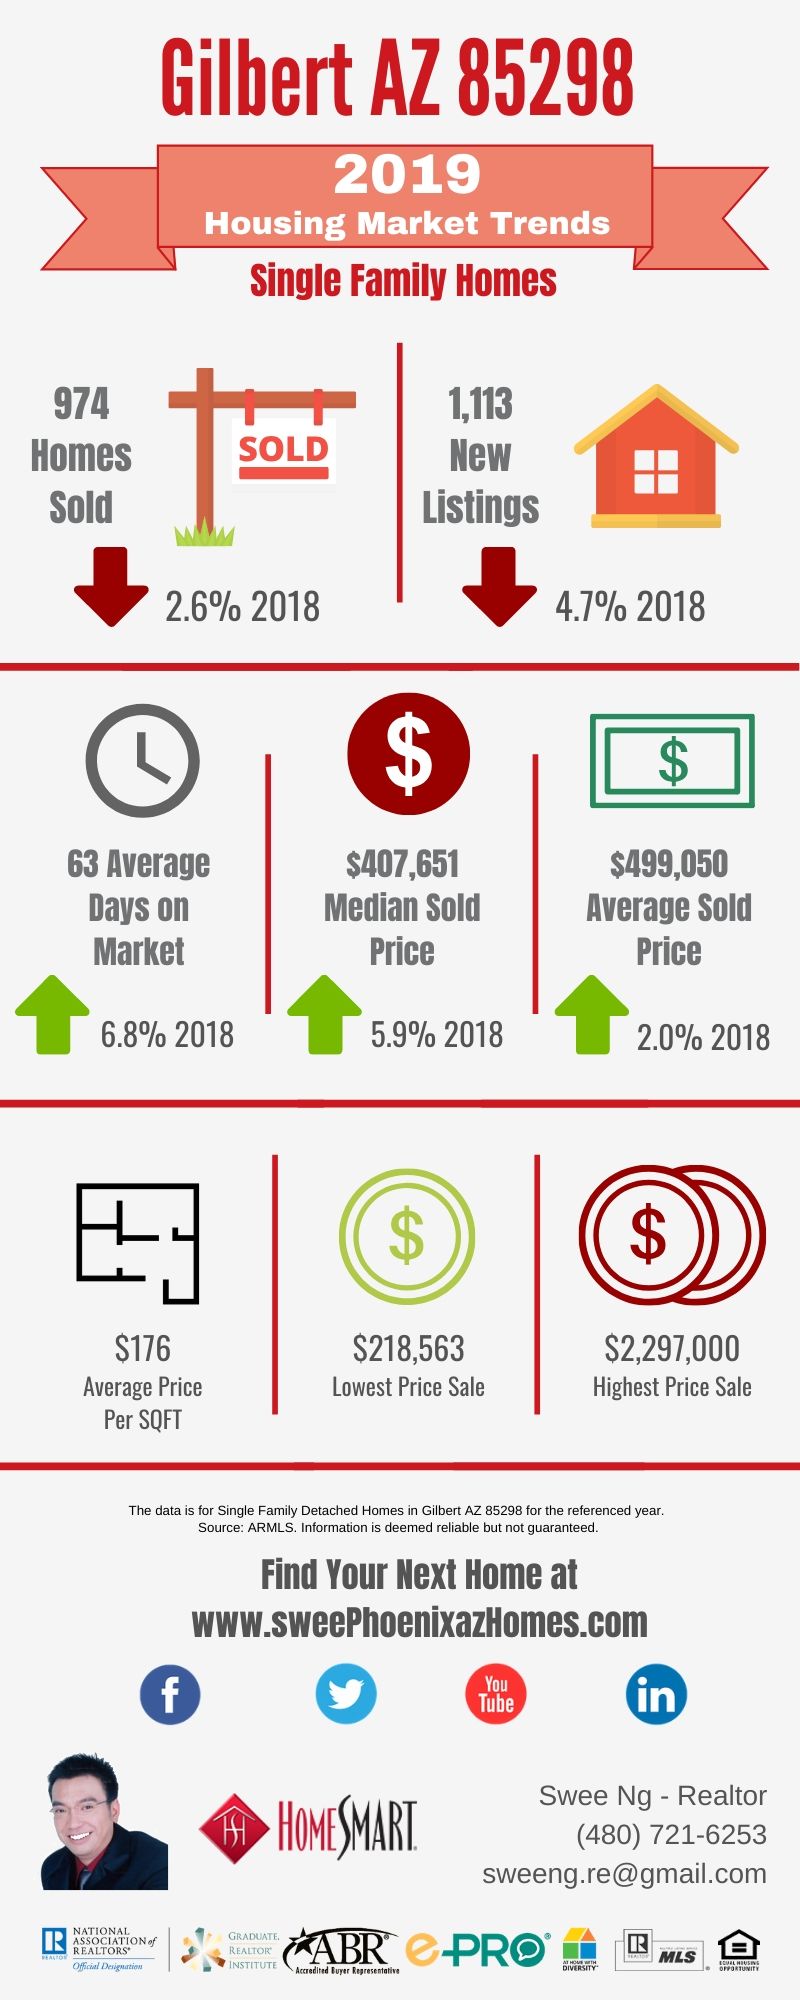 Gilbert AZ 85298 Housing Market Trends Report 2019 by Swee Ng, Real Estate and House Value